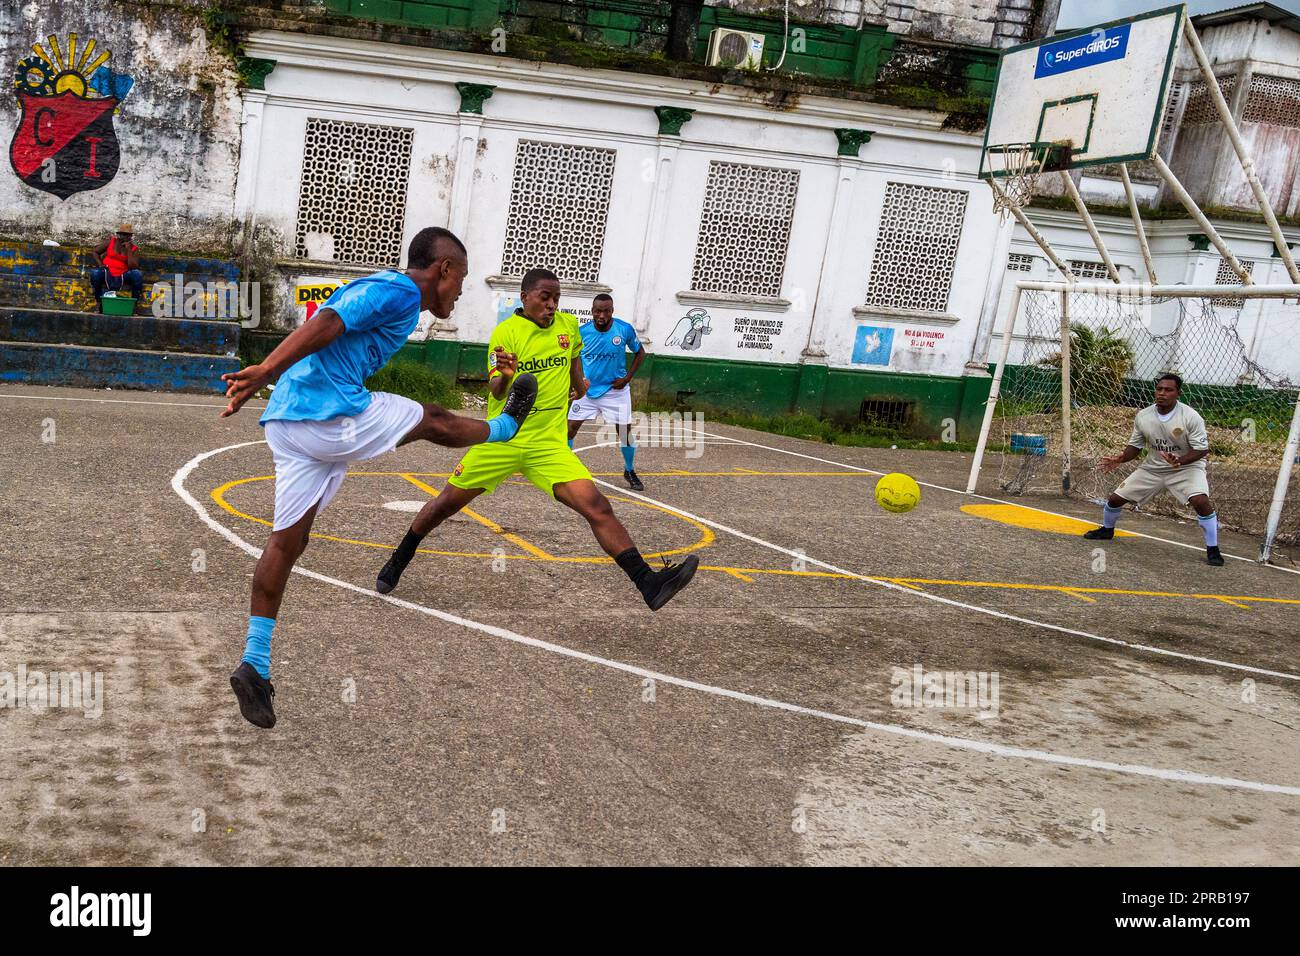 Young Afro-Colombian football players play a friendly match on a concrete playing field in Quibdó, Chocó, Colombia. Stock Photo